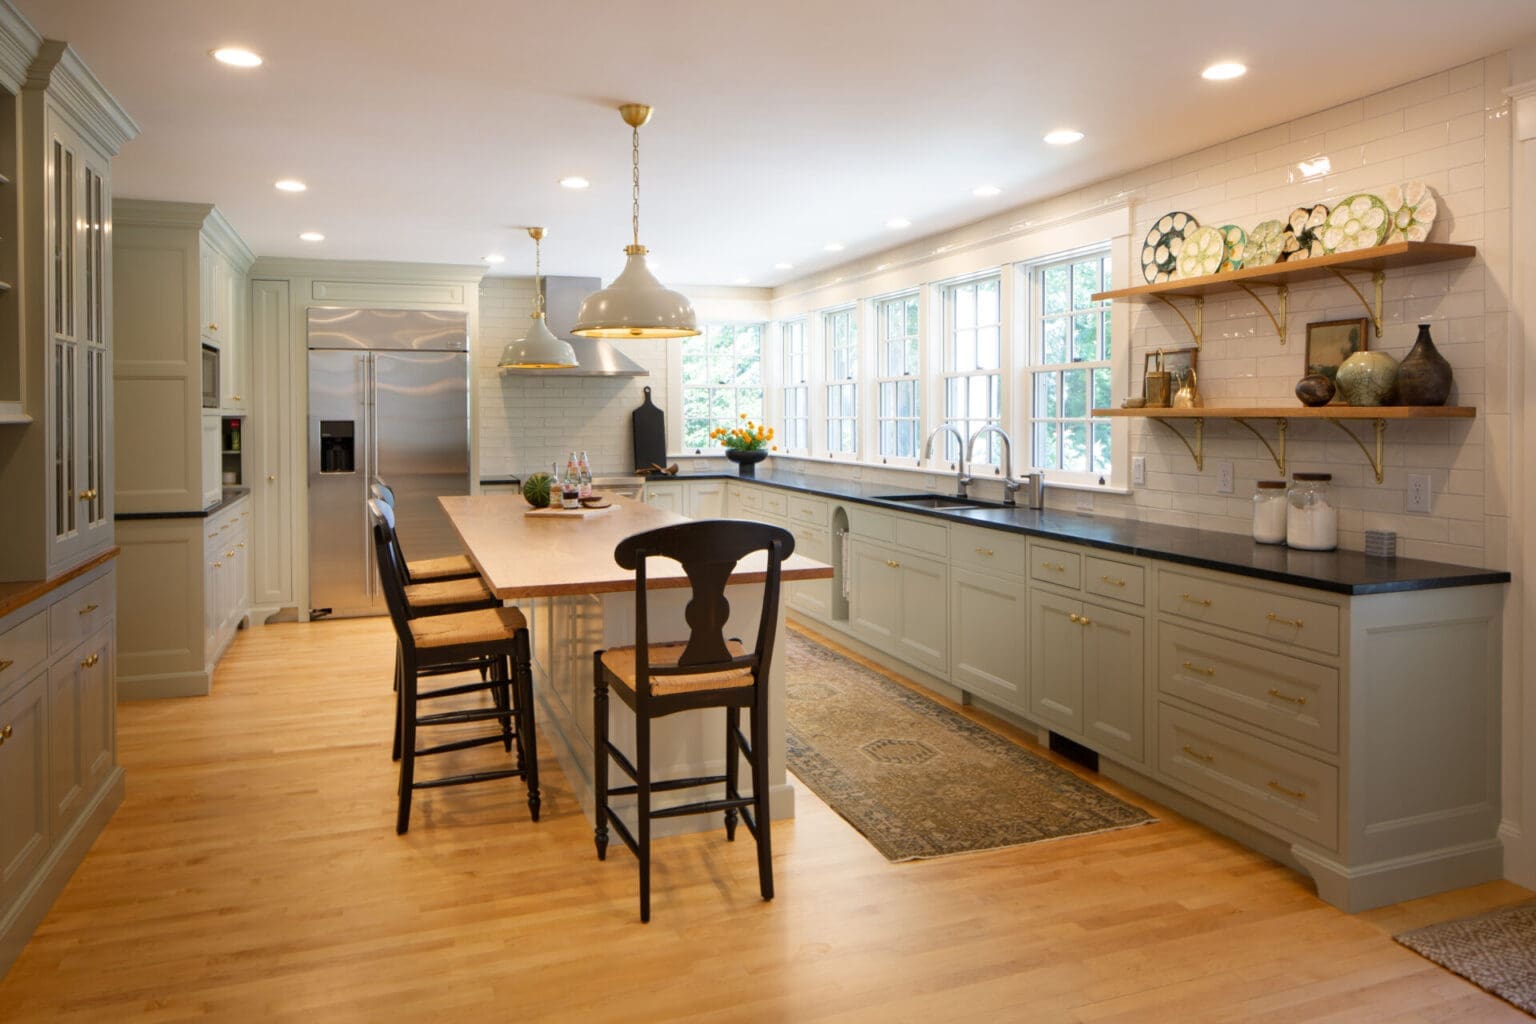 Photo of a classic grey-teal kitchen with shaker-style cabinets, brass hardware, stone countertops, a bank of windows, and a large island with natural wooden top.